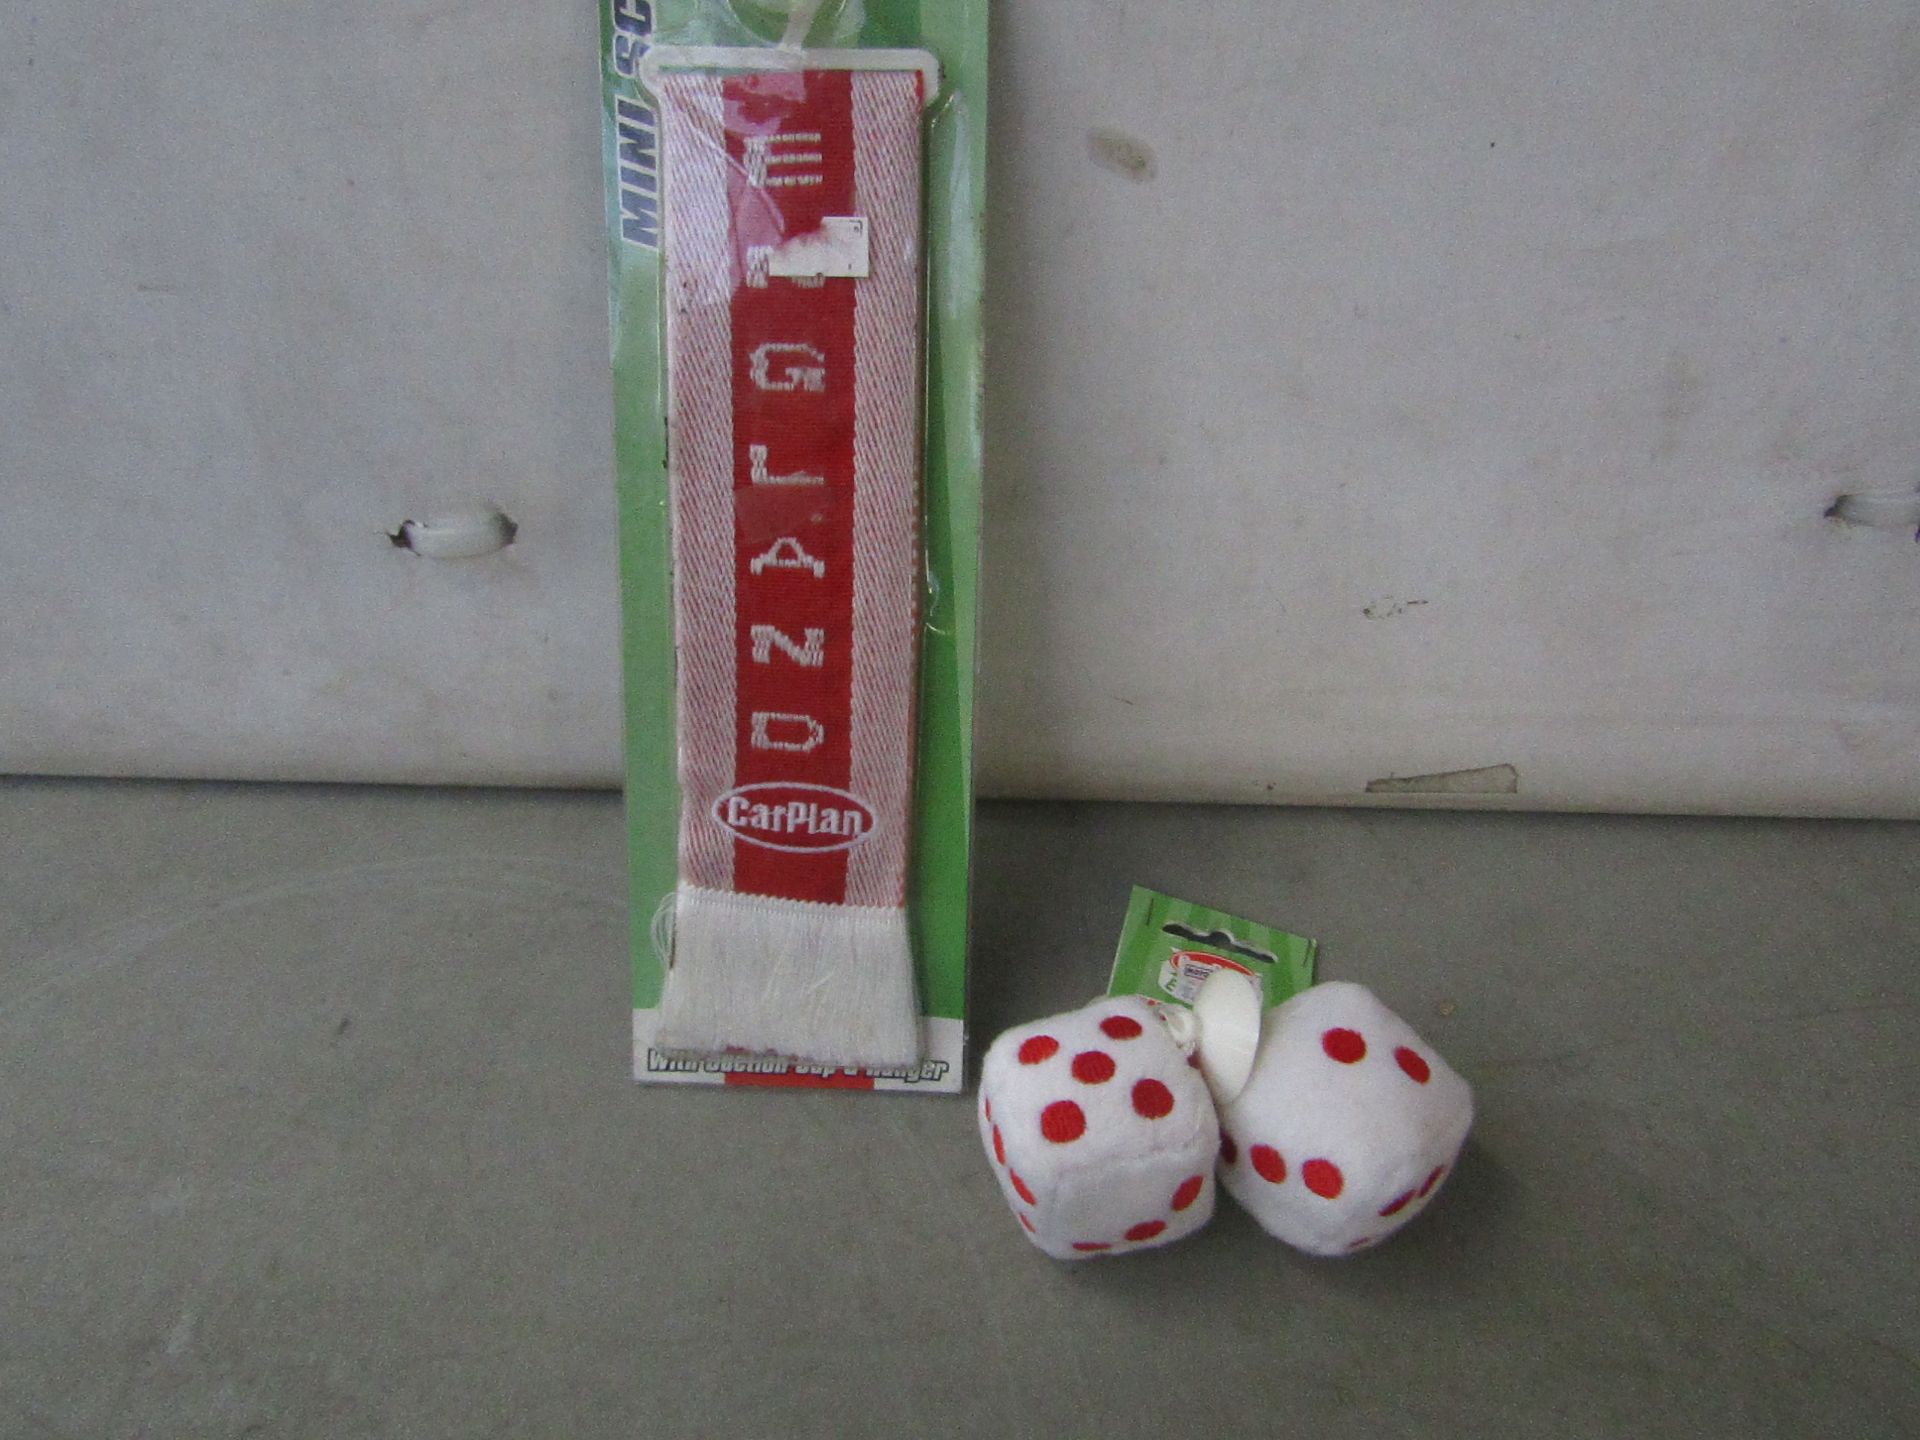 1x Carplan - Mini England Scarf - Unused & Packaged. 1x Fabric Engand Dice (With Suction Cup) -